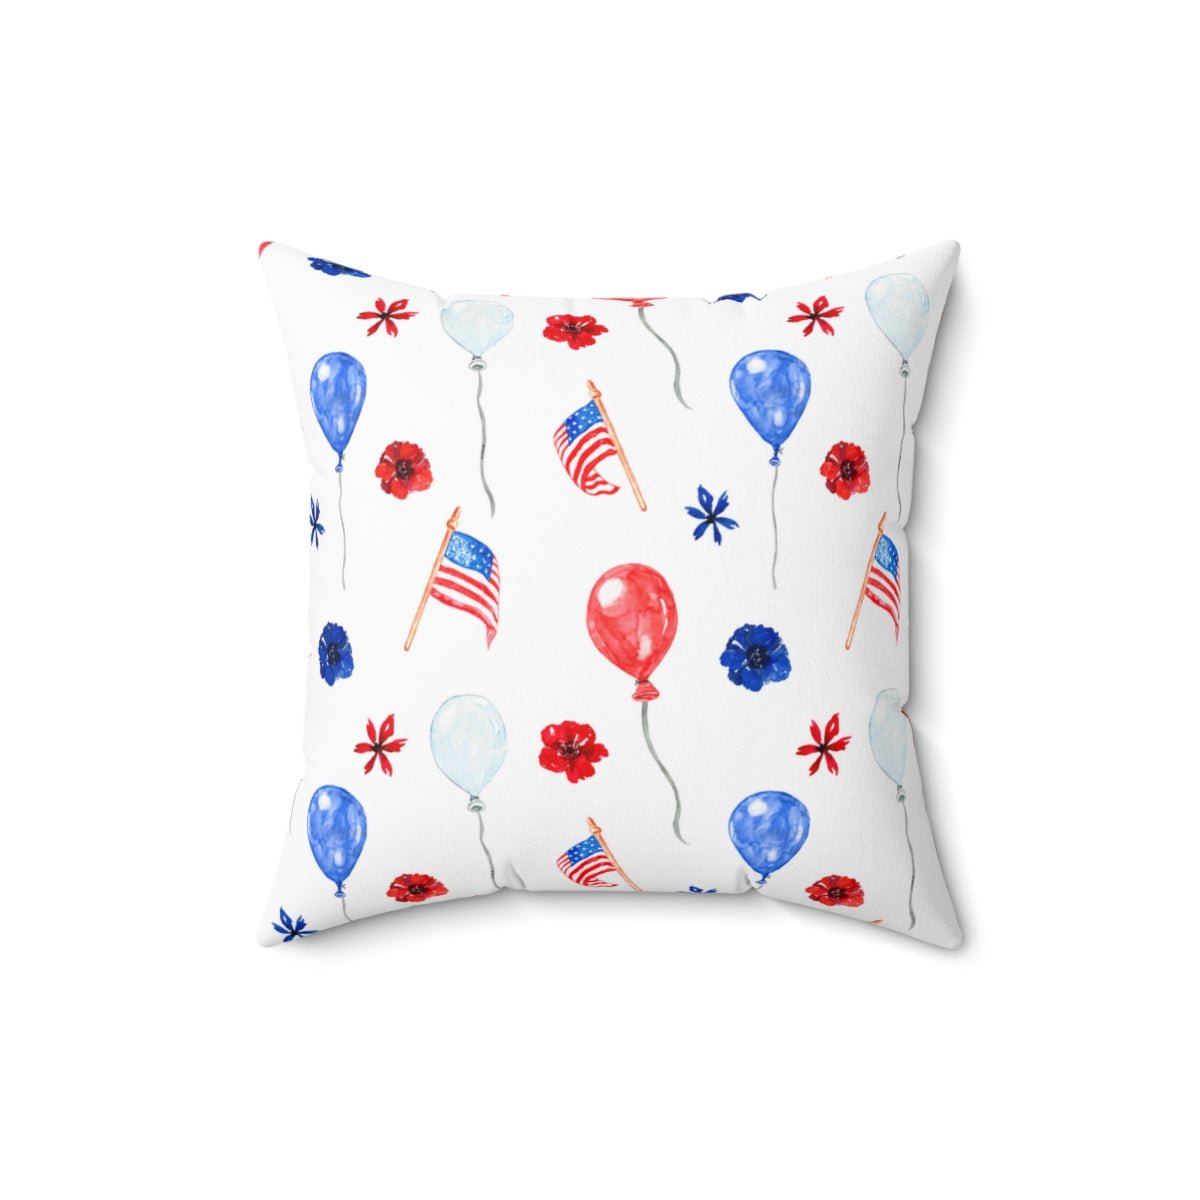 American Flags and Balloons Spun Polyester Square Pillow with Insert - Puffin Lime